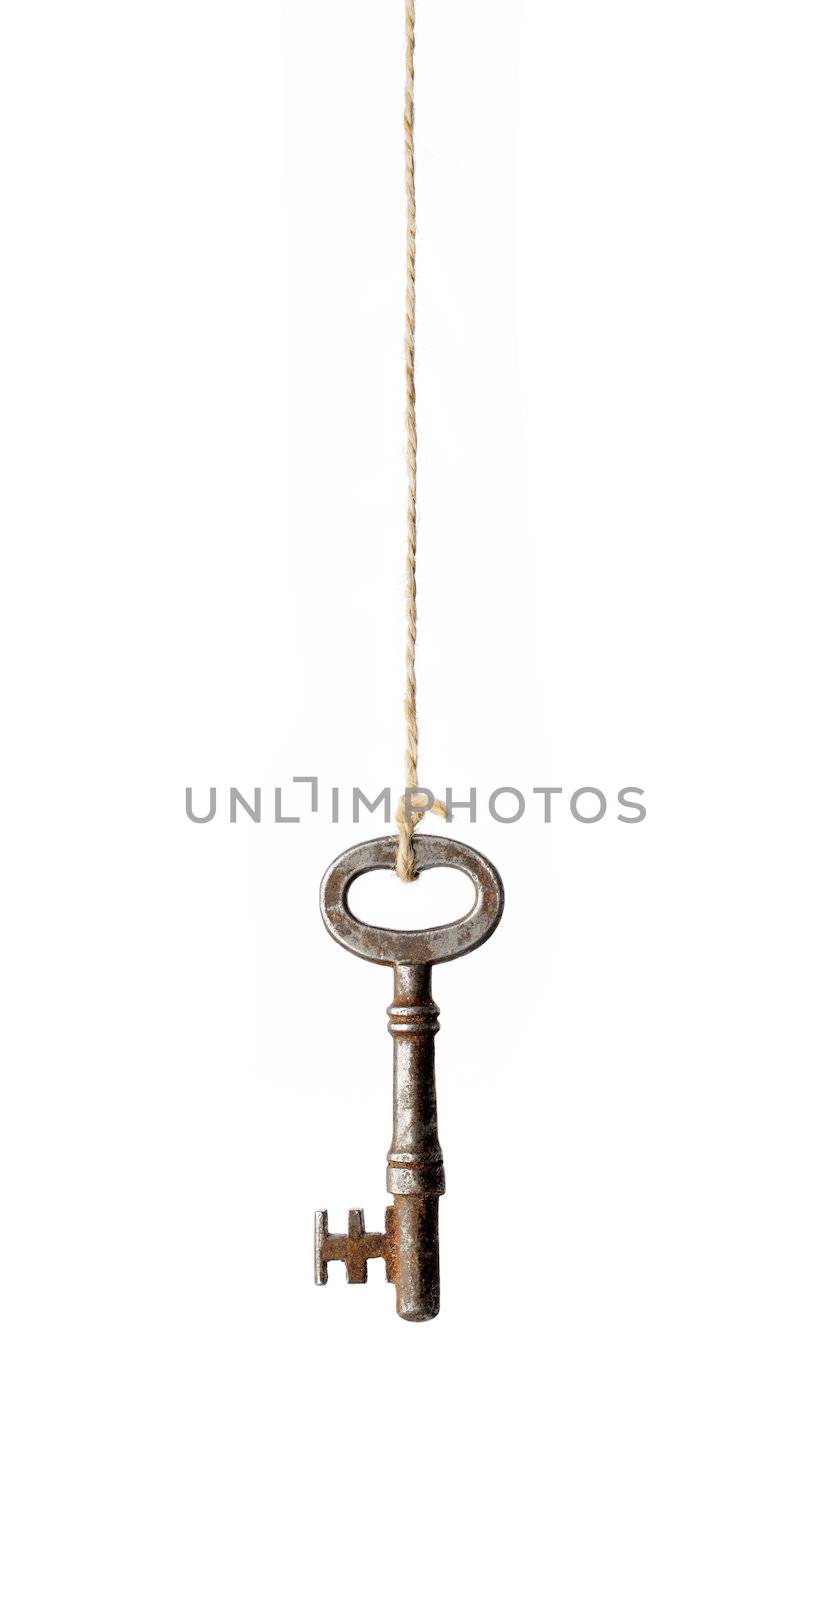 Old antique rusty key hanging from a string.